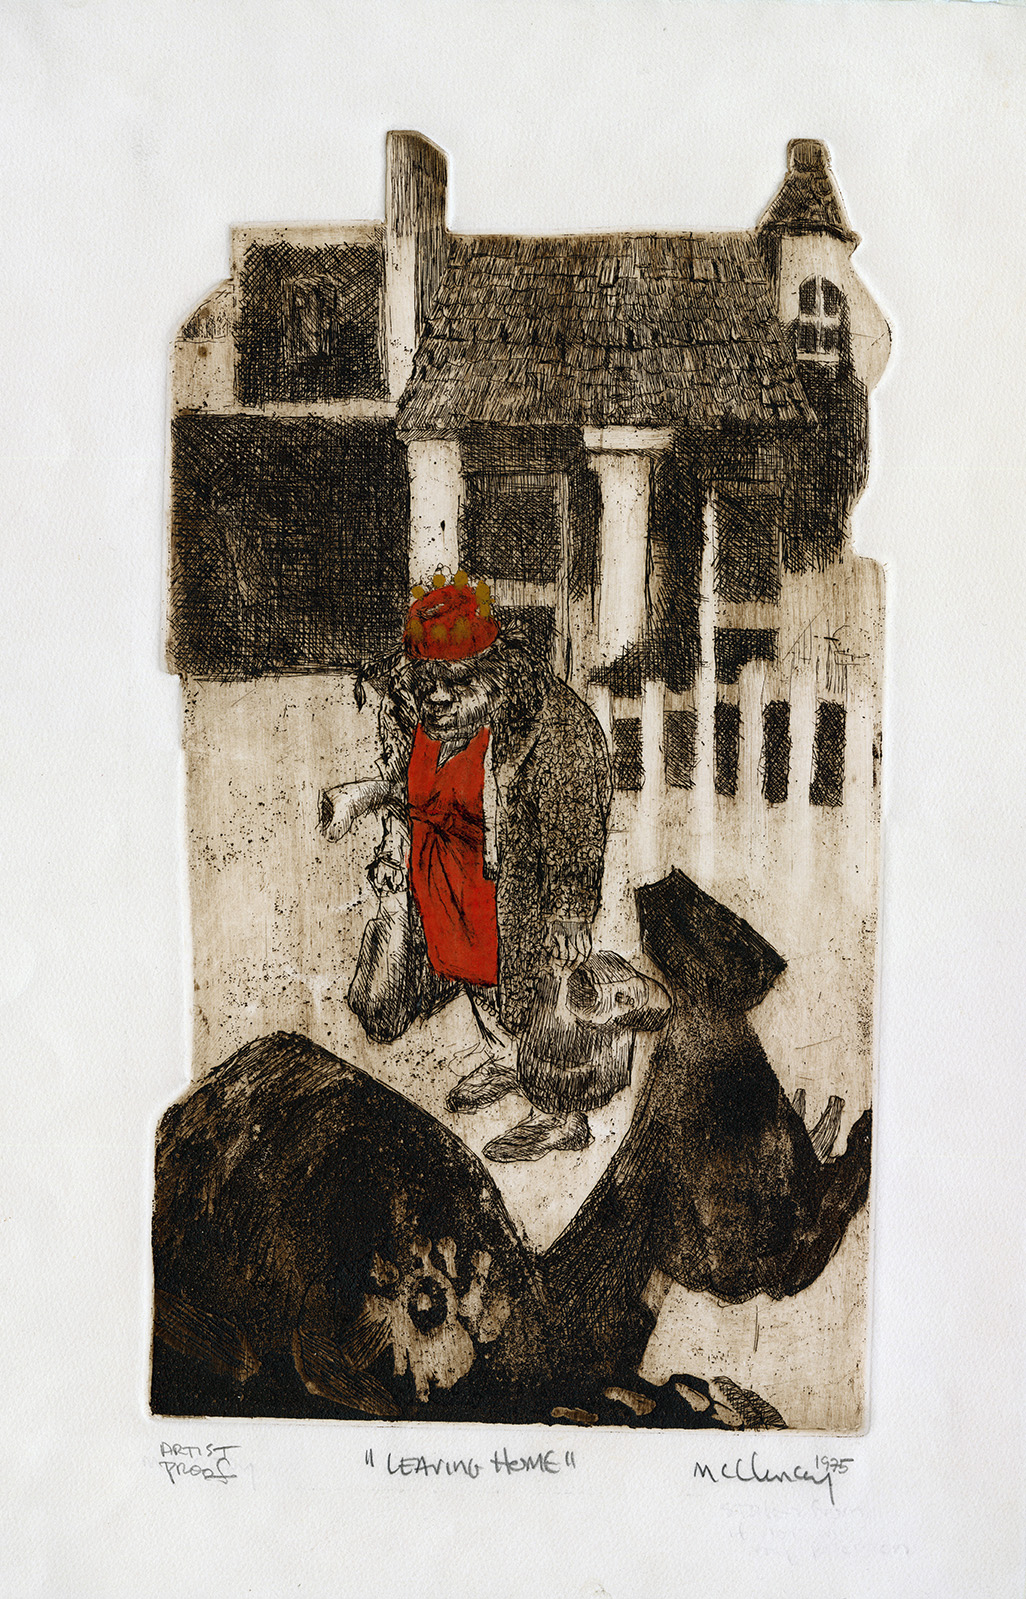 Woman in red dress and hat in front of a house carrying two bags. A backhoe stands in foreground. Etching in red and sepia by Edward McCluney.